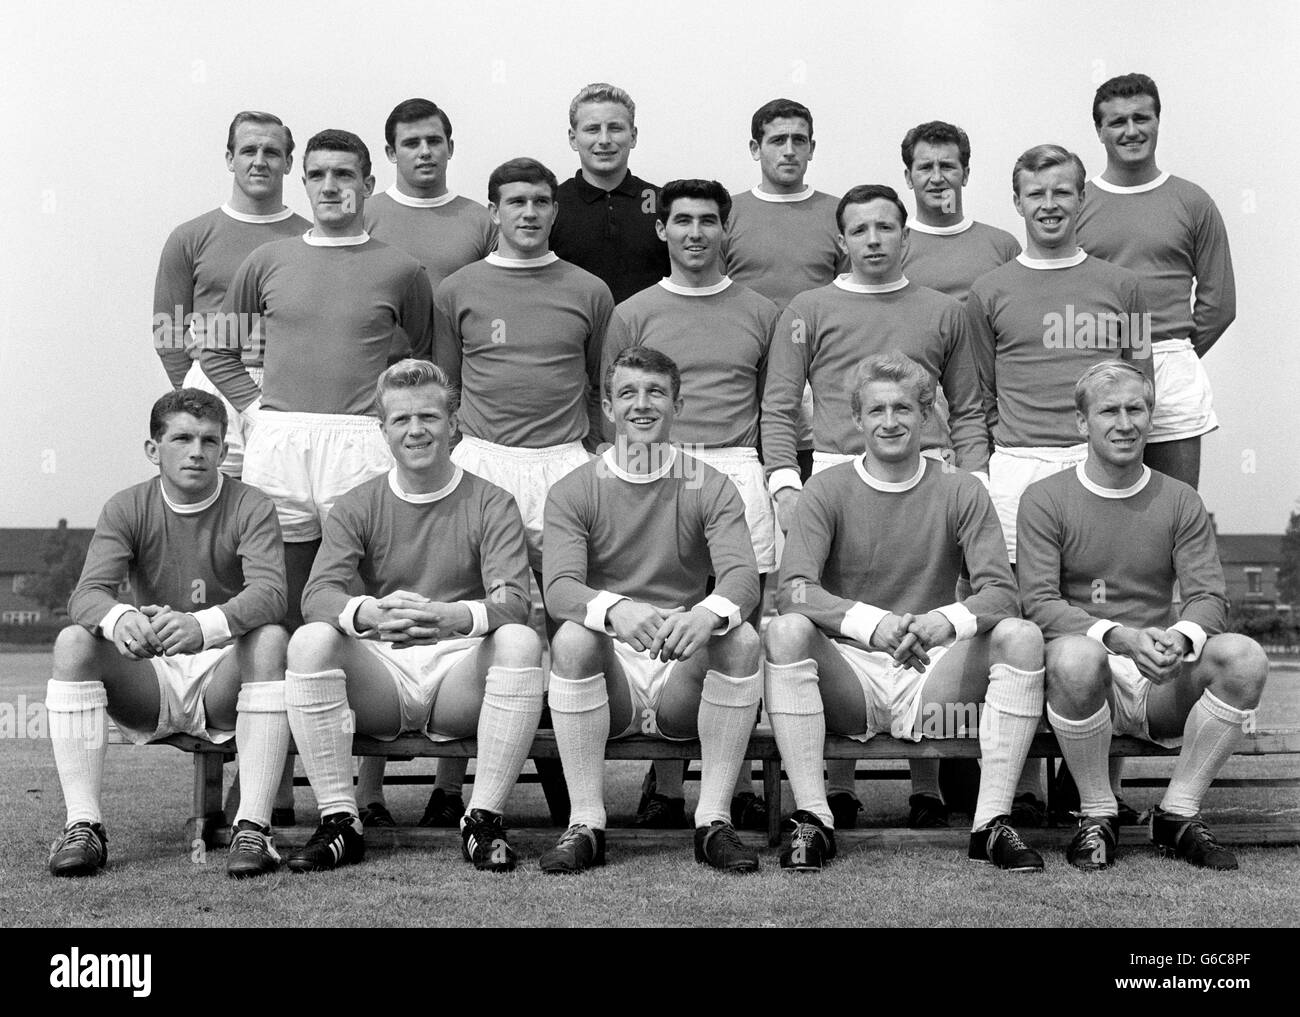 Players of Manchester United who meet Leicester City in the FA Cup Final at Wembley Stadium. Left to right: Back row - Maurice Setters, James Nicholson, David Gaskell (goalkeeper), Seamus Brennan, Mark Pearson and Noel Cantwell. Middle row - William Foulkes, Samuel McMillan, Anthony Dunne, Norbert (Nobby) Stiles and Norbert Lawson. Front row - John Giles, ALbert Quixall, David Herd, Denis Law and Bobby Charlton. Stock Photo